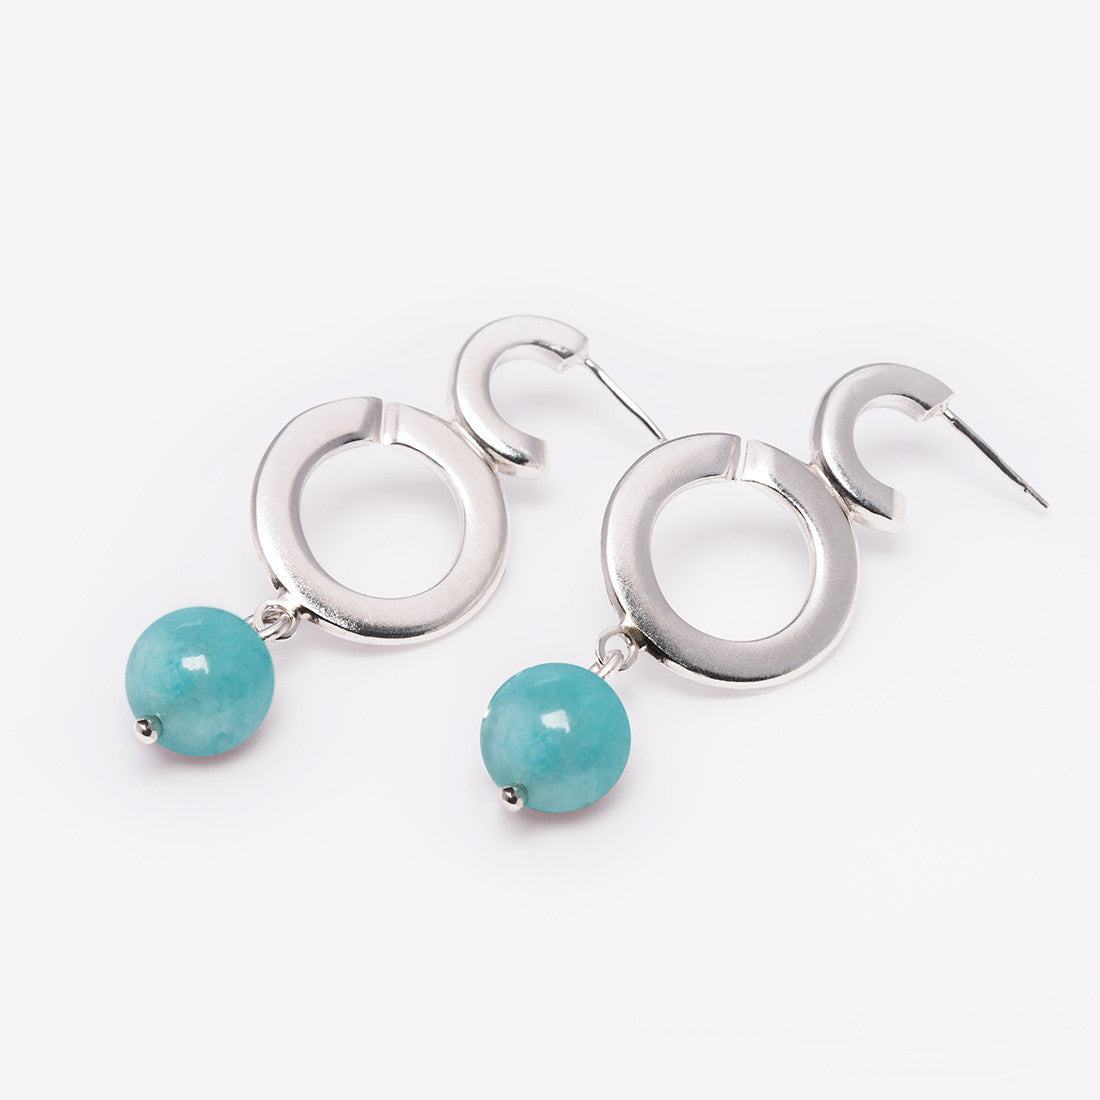 Bubbles earrings with stone